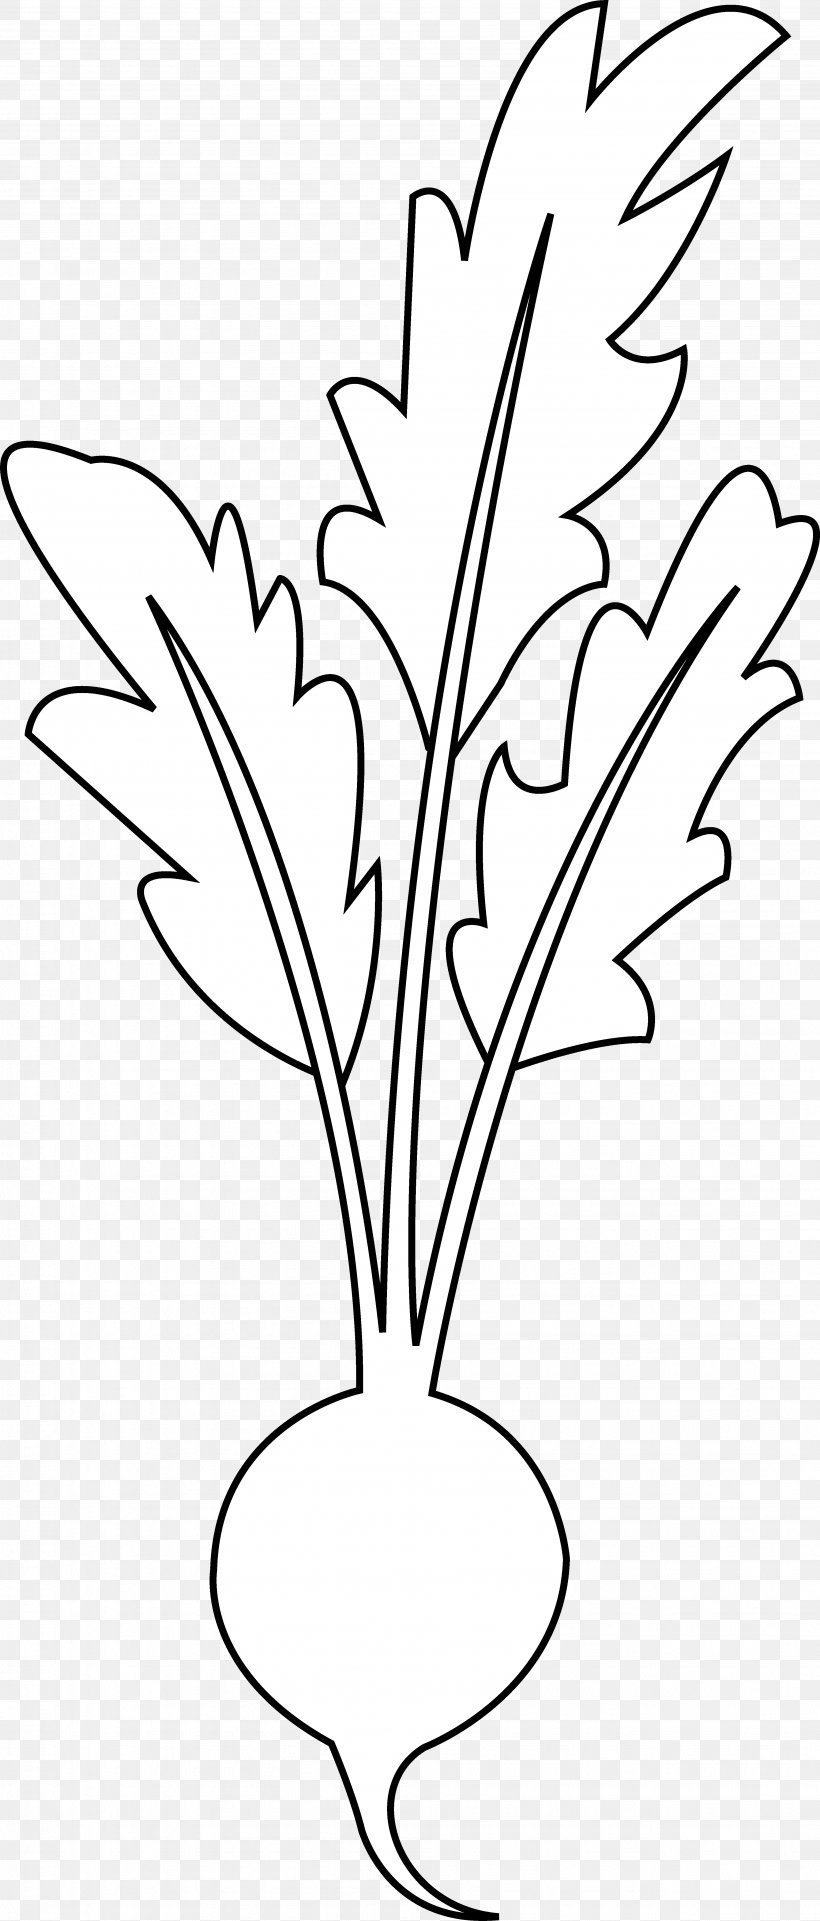 Beetroot Line Art Vegetable Black And White Clip Art, PNG, 3882x9097px, Beetroot, Beet, Black And White, Branch, Cartoon Download Free